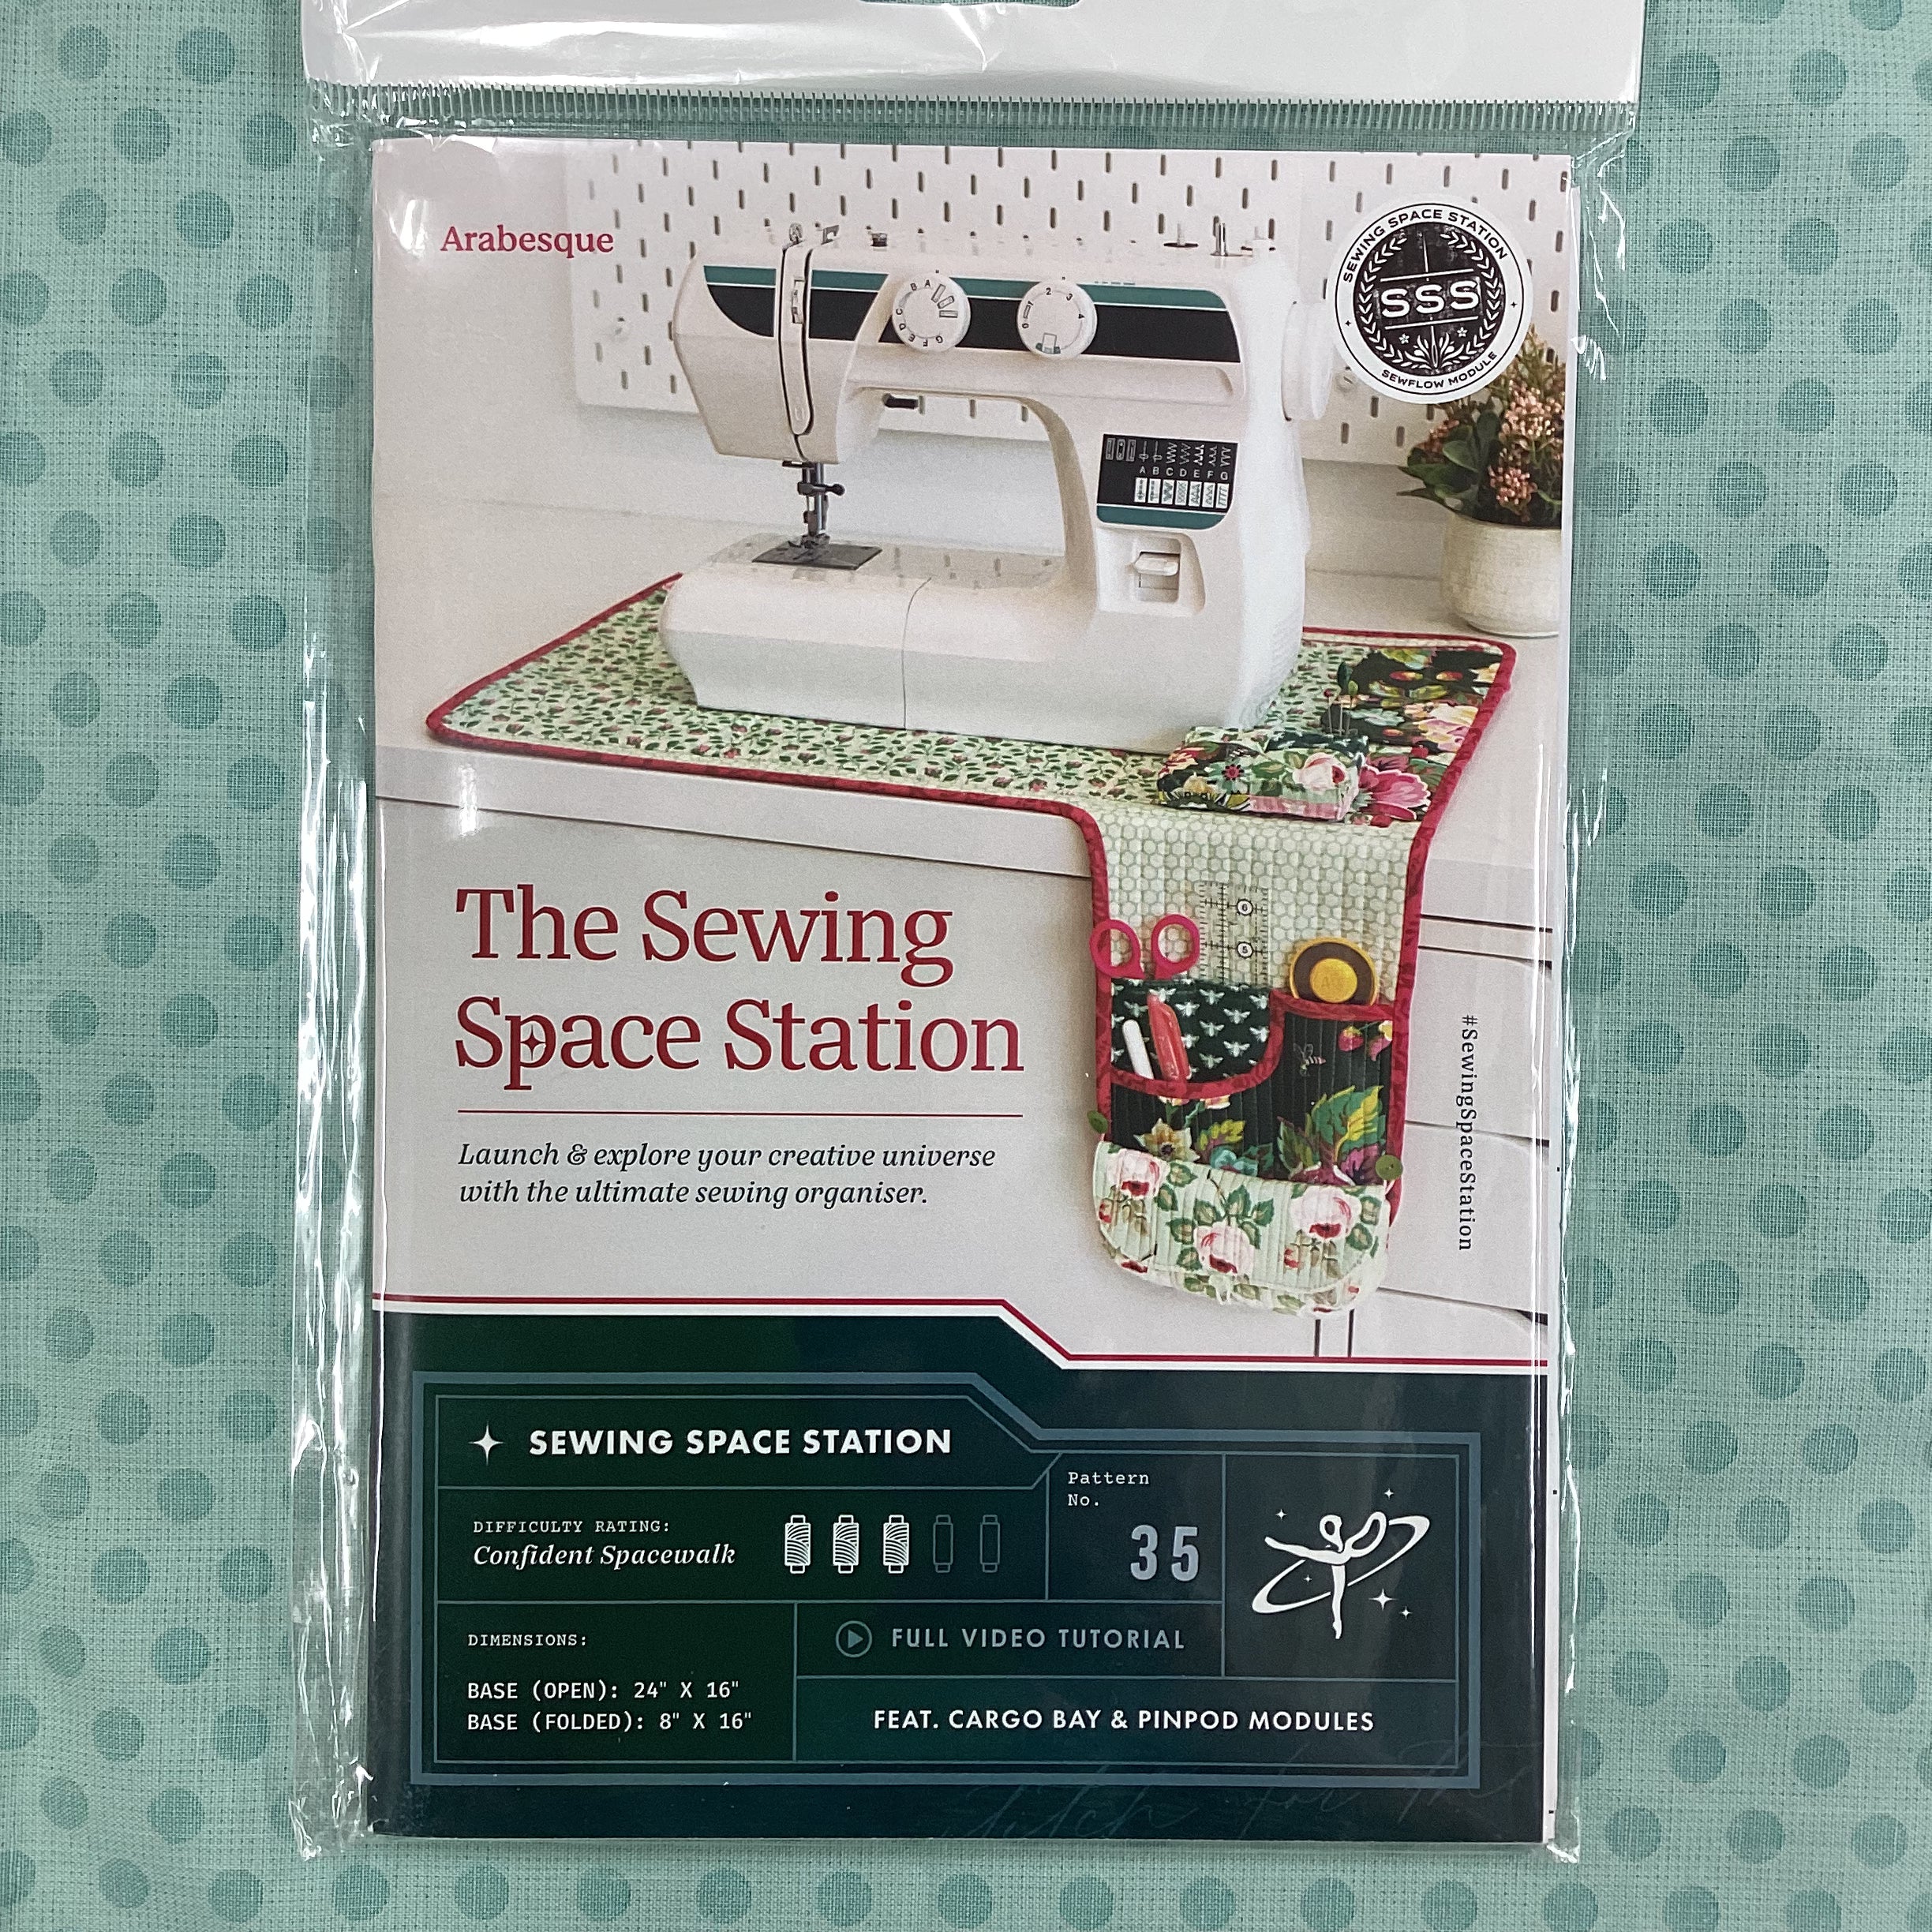 Sewing Space Station Pattern by Arabesque Scissors